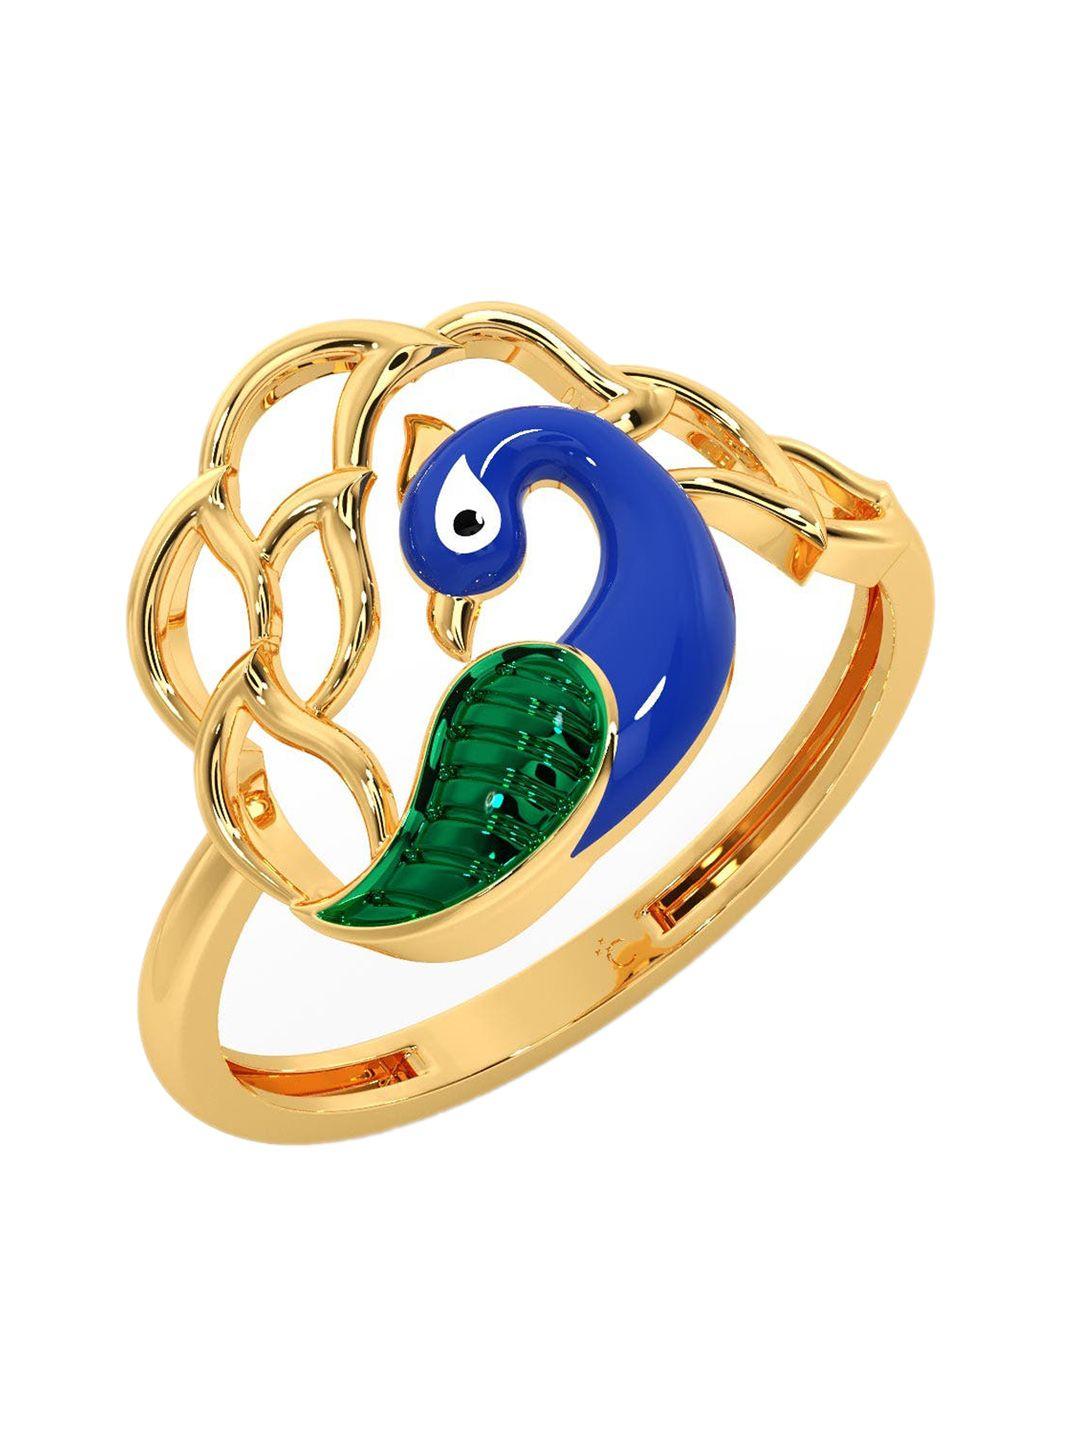 candere a kalyan jewellers company peacock 18kt bis hallmark gold ring-2.02gm